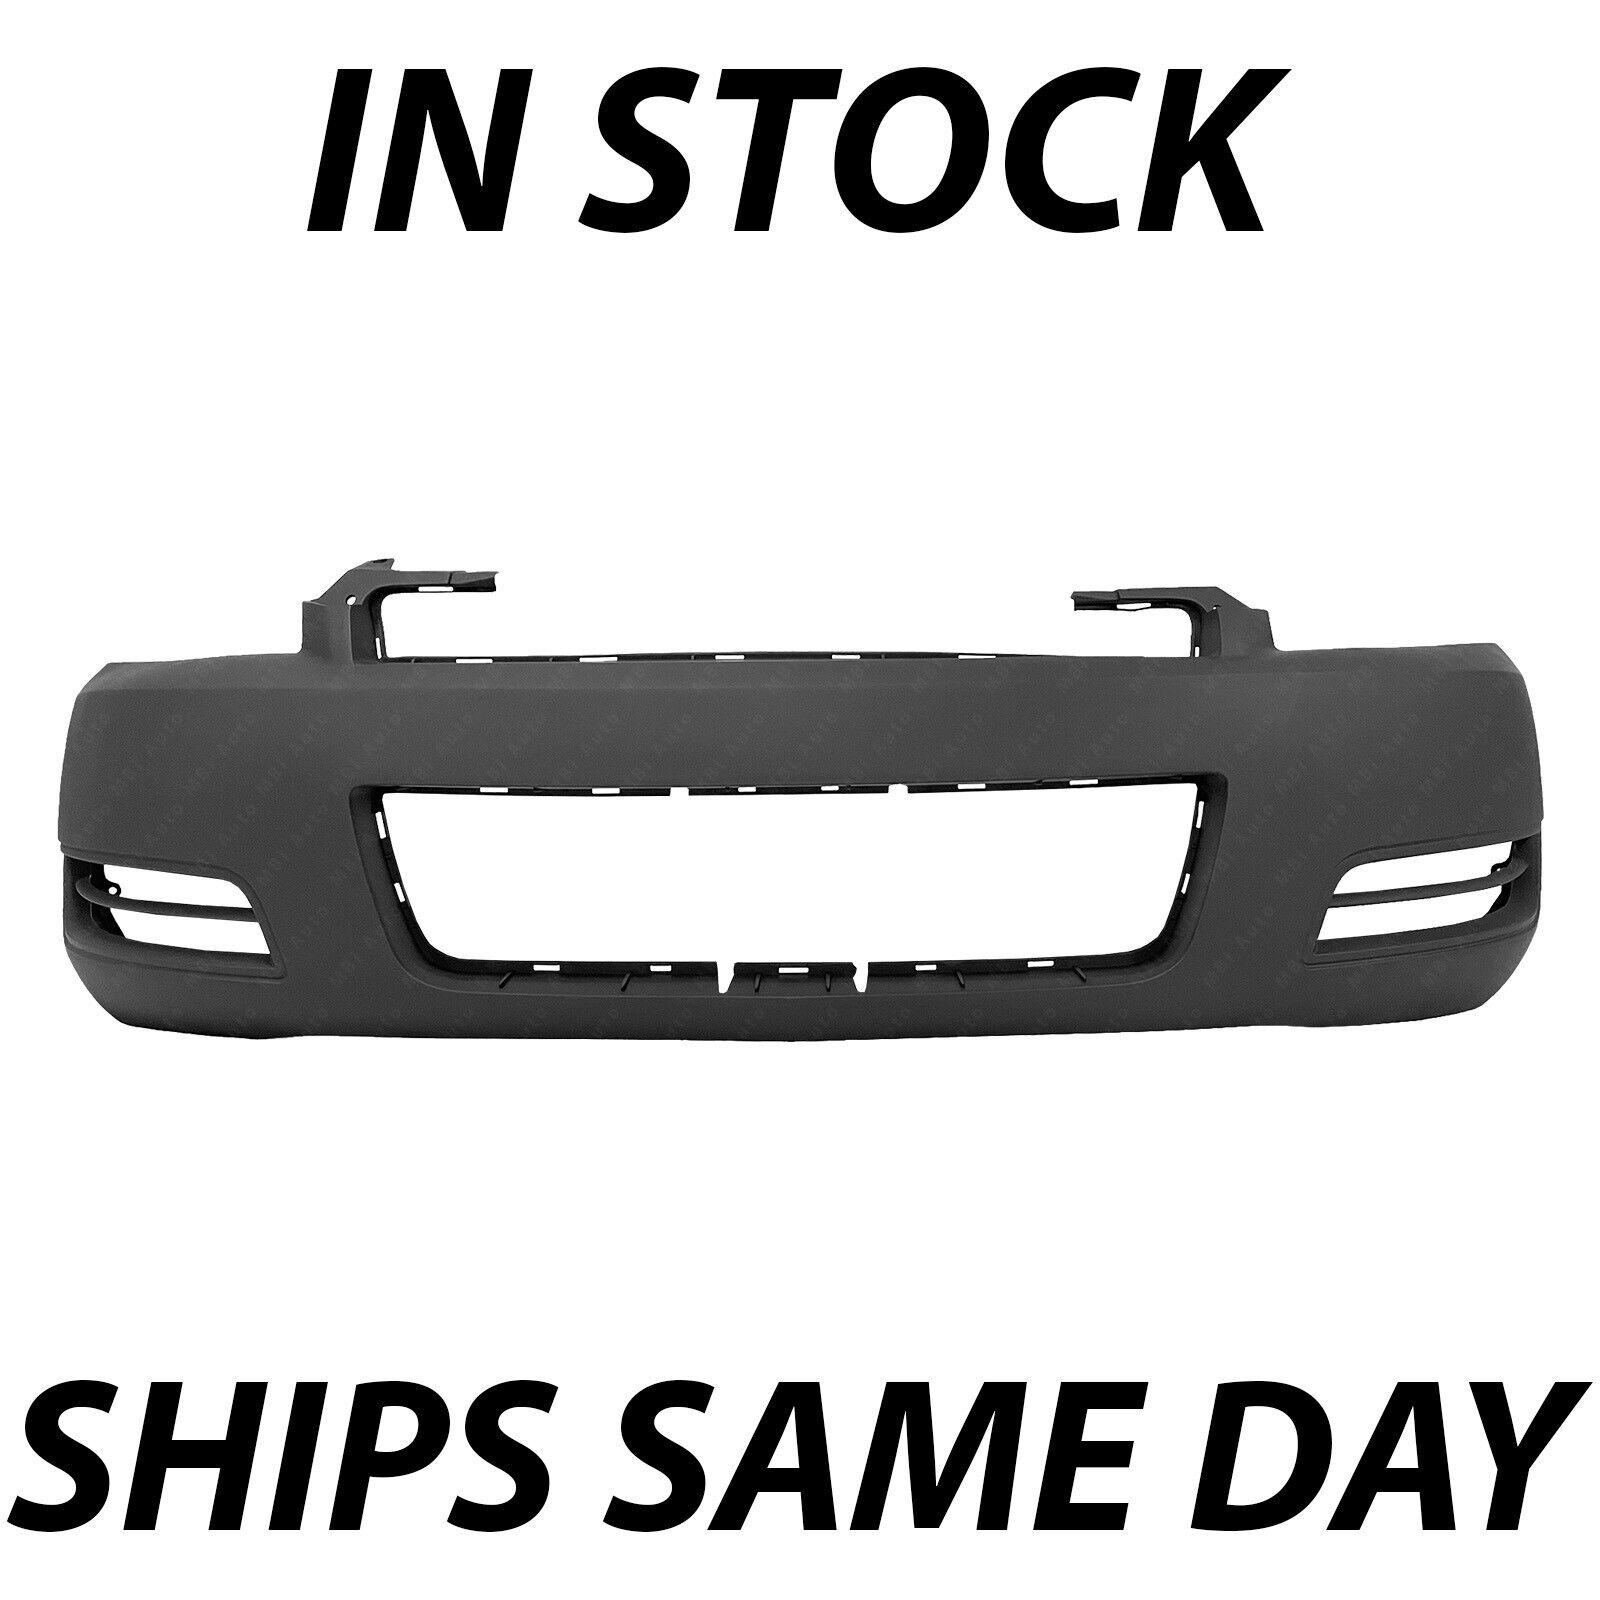 NEW Primered - Front Bumper Cover Replacement for 2006-2013 Chevrolet Impala